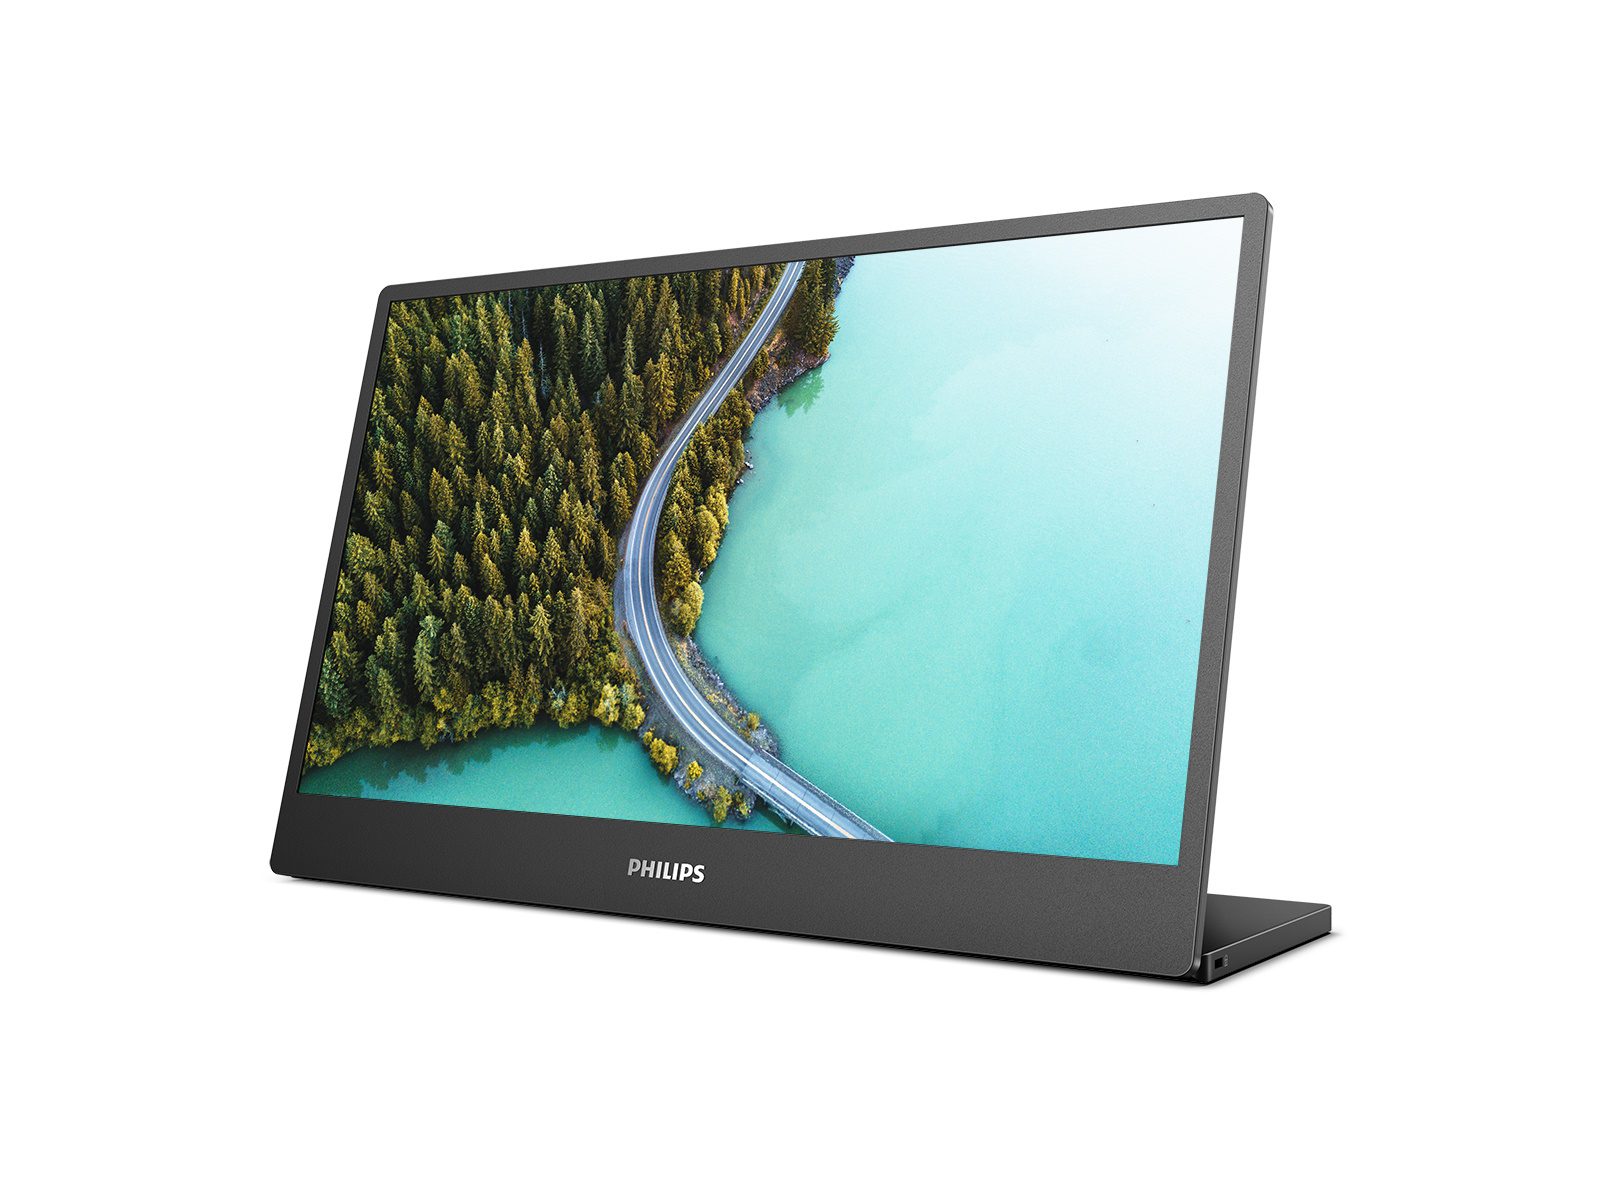 MMD launches a 16-inch Full HD portable monitor with a USB-C port